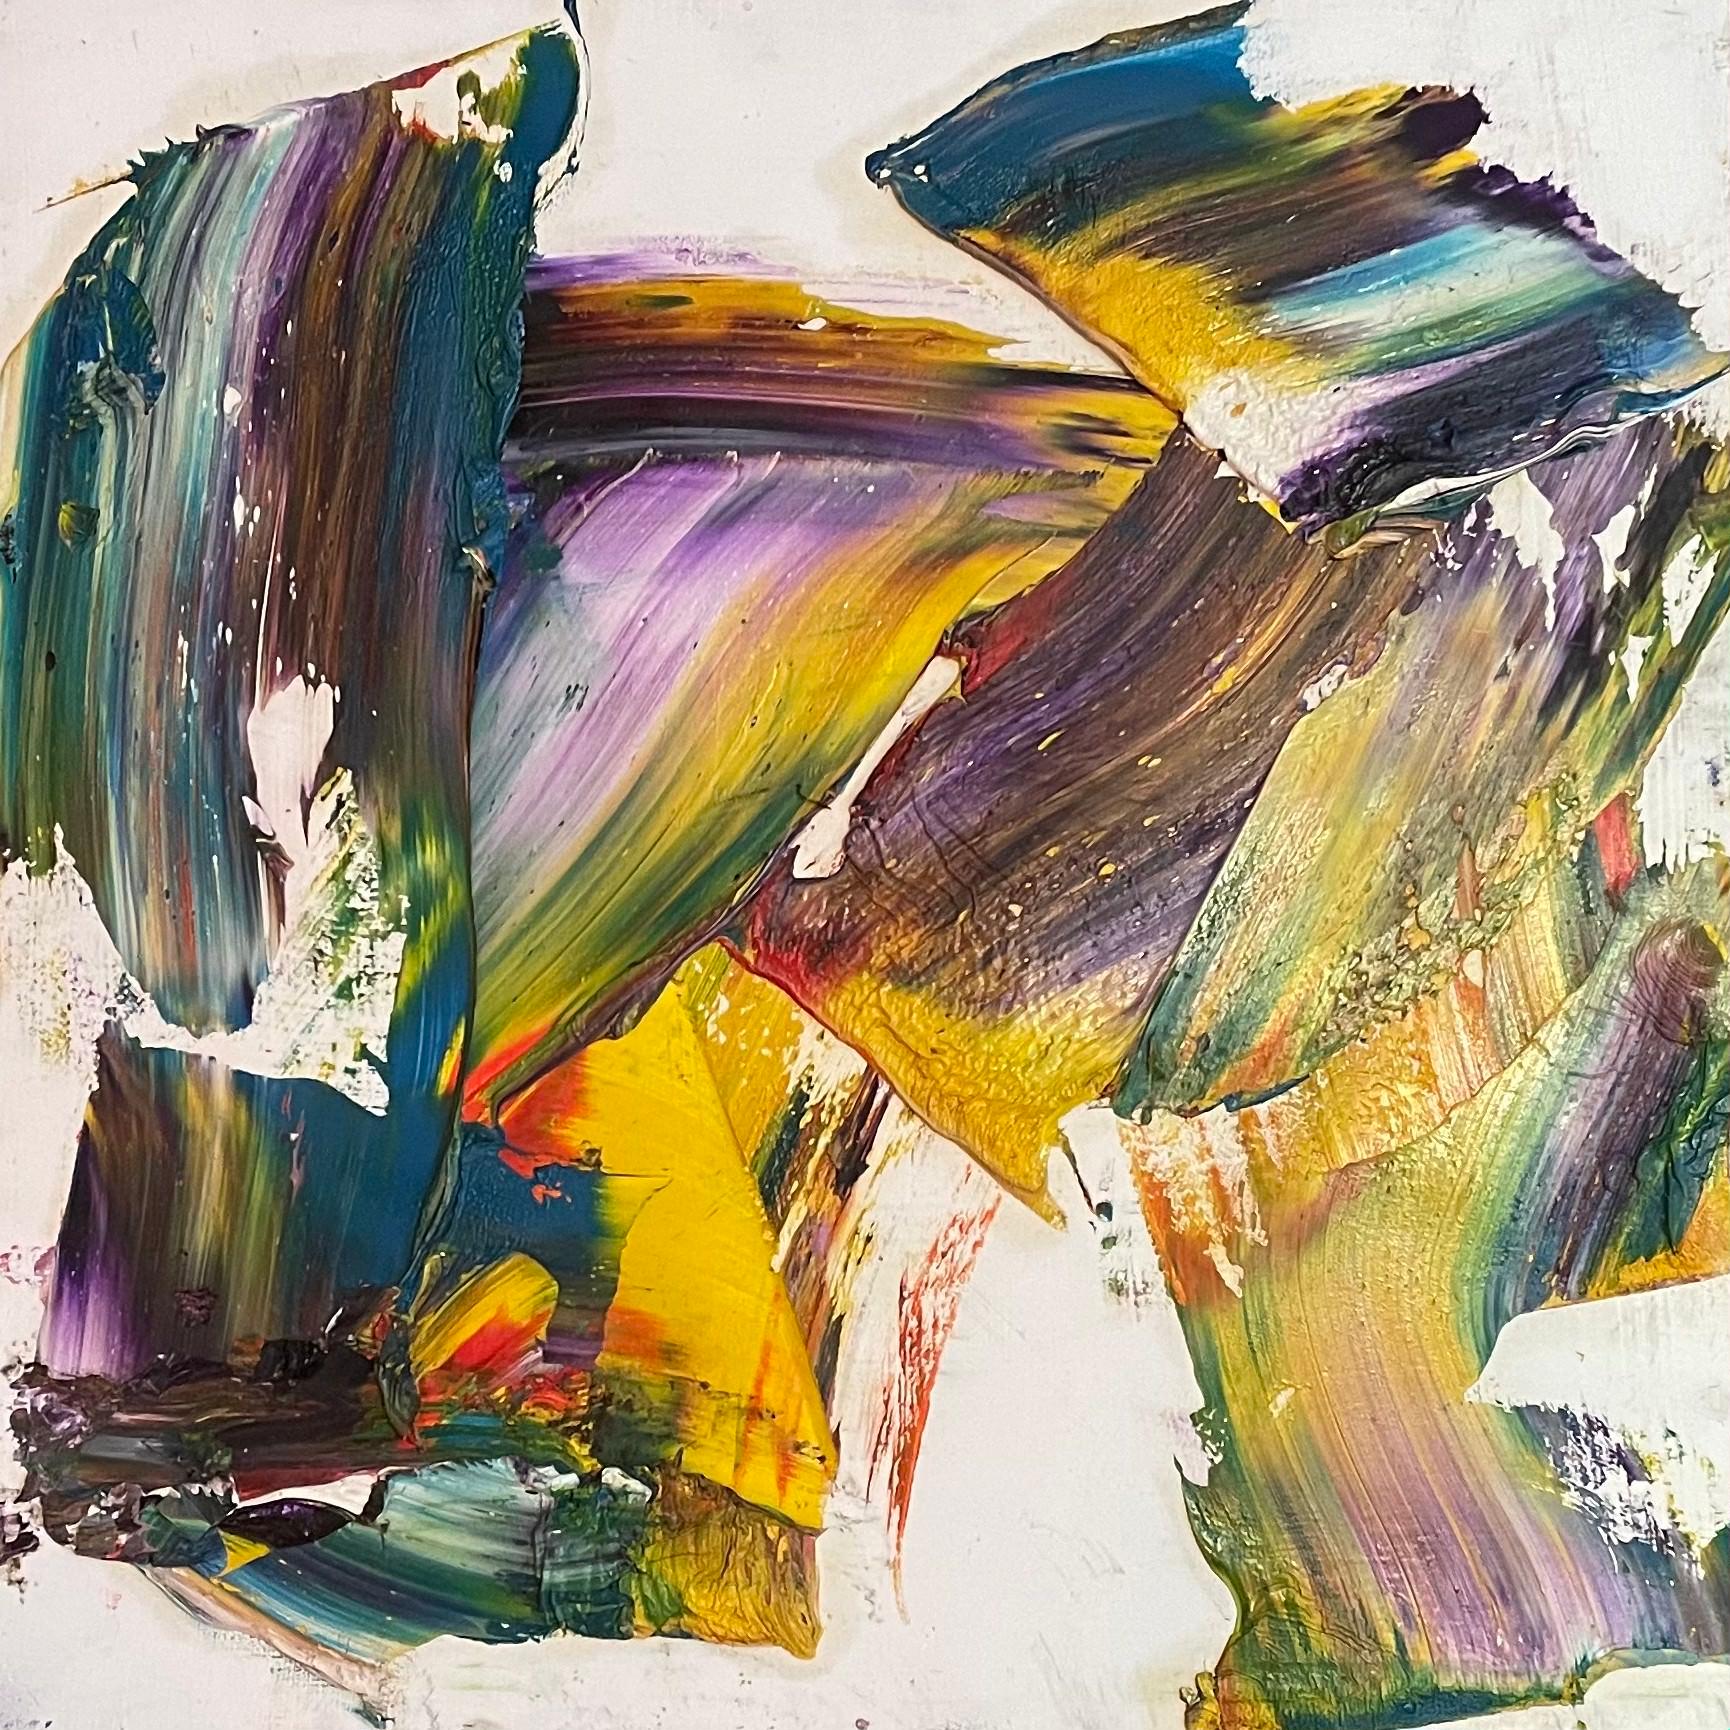 Steven Rehfeld's 18.25" x 18.25" piece "Prism" is a symphony of colors, each note more vibrant than the last. The textured strokes, both bold and deliberate, seem to dance across the canvas, emanating a palpable energy. There's a sense of movement,